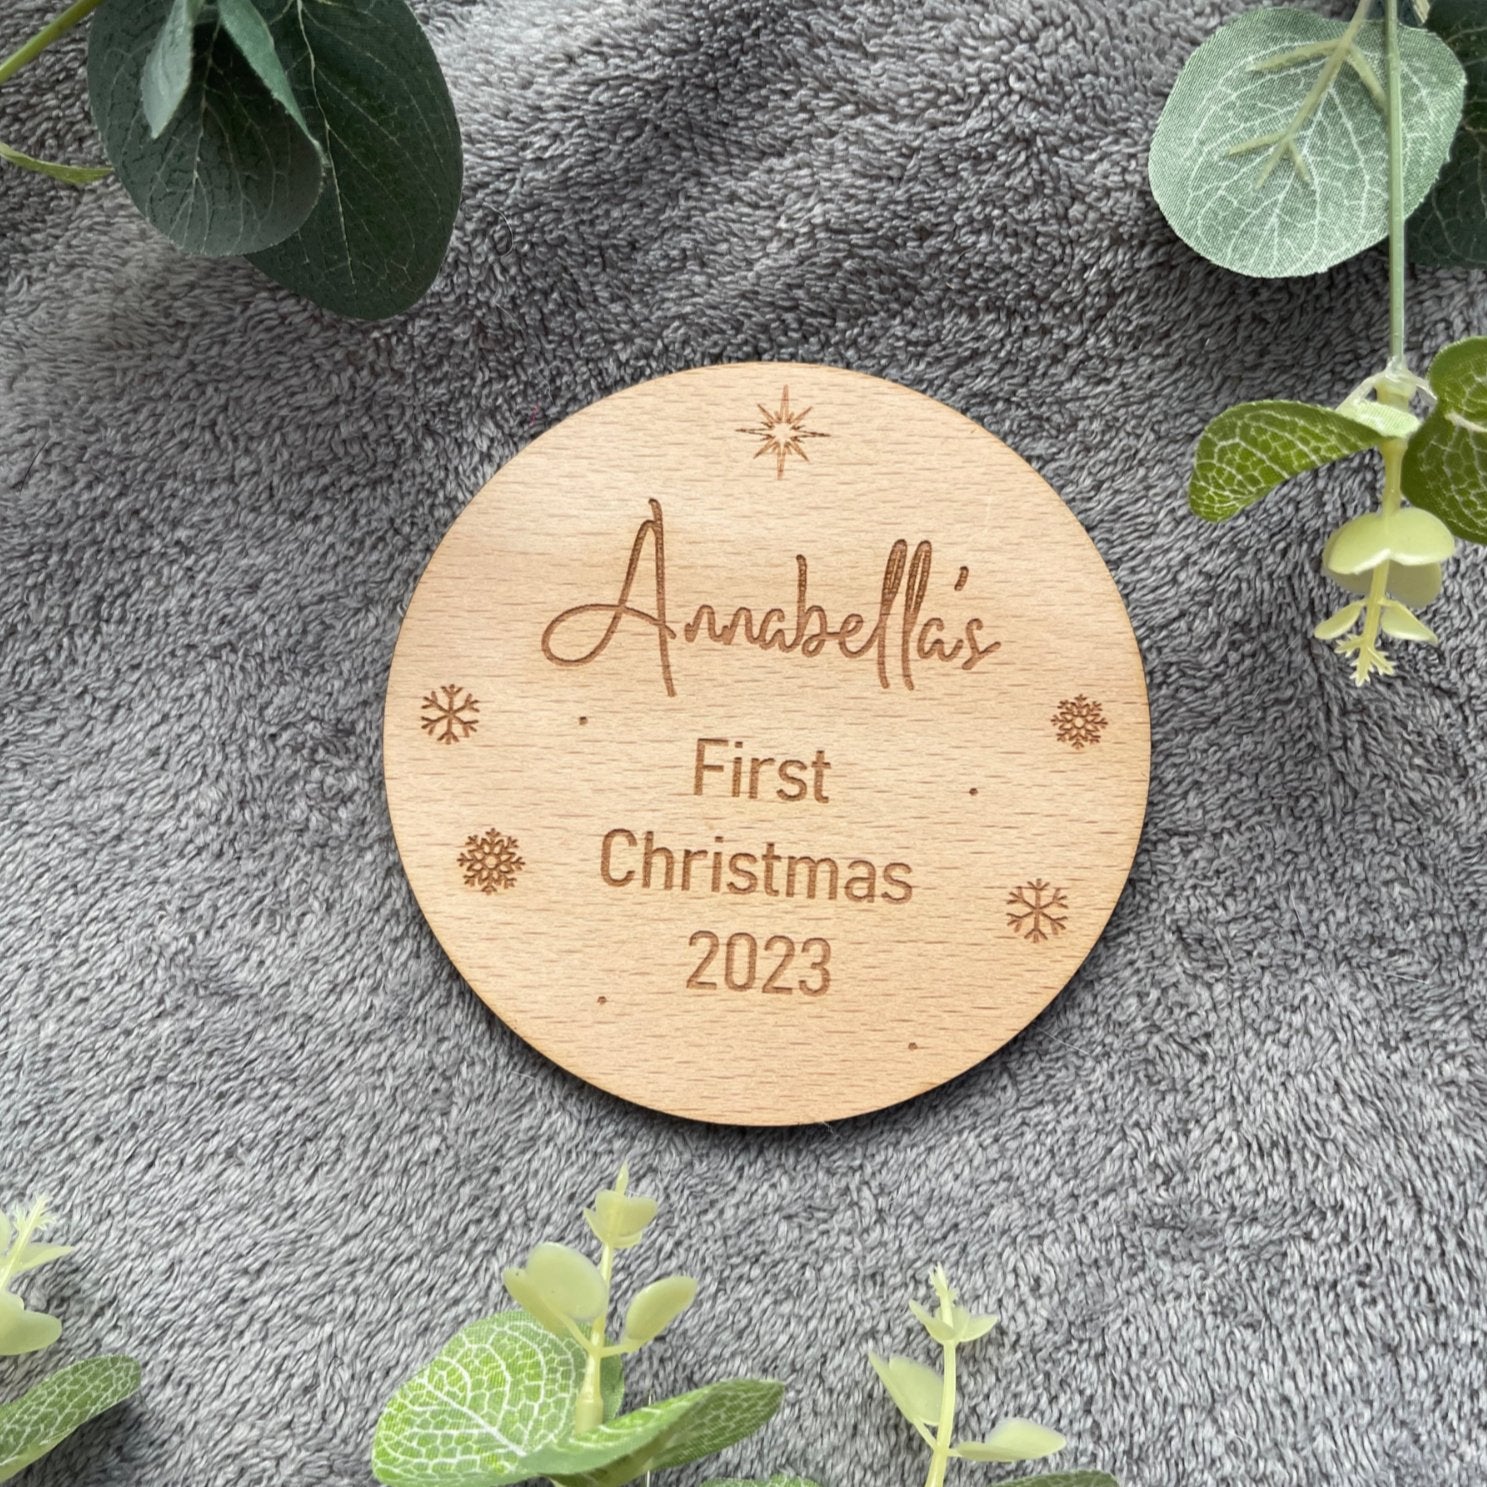 Personalized baby's first Christmas wooden plaque made from real beech veneer, featuring custom name. Ideal for holiday decor and capturing precious moments. Available in 10X10cm or 15X15cm sizes